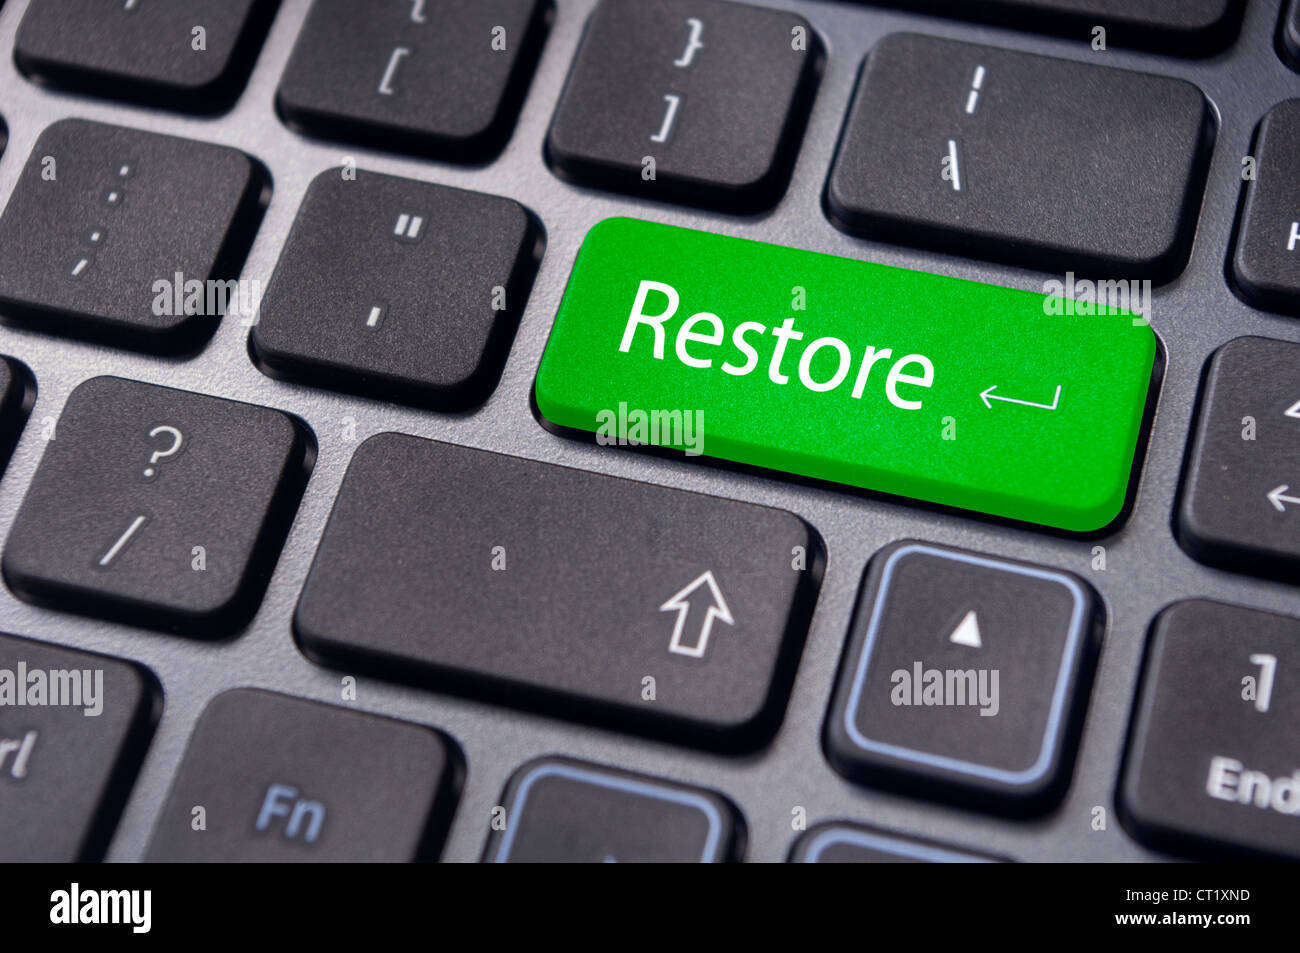 restore concepts, with a message on enter key of keyboard. Stock Photo